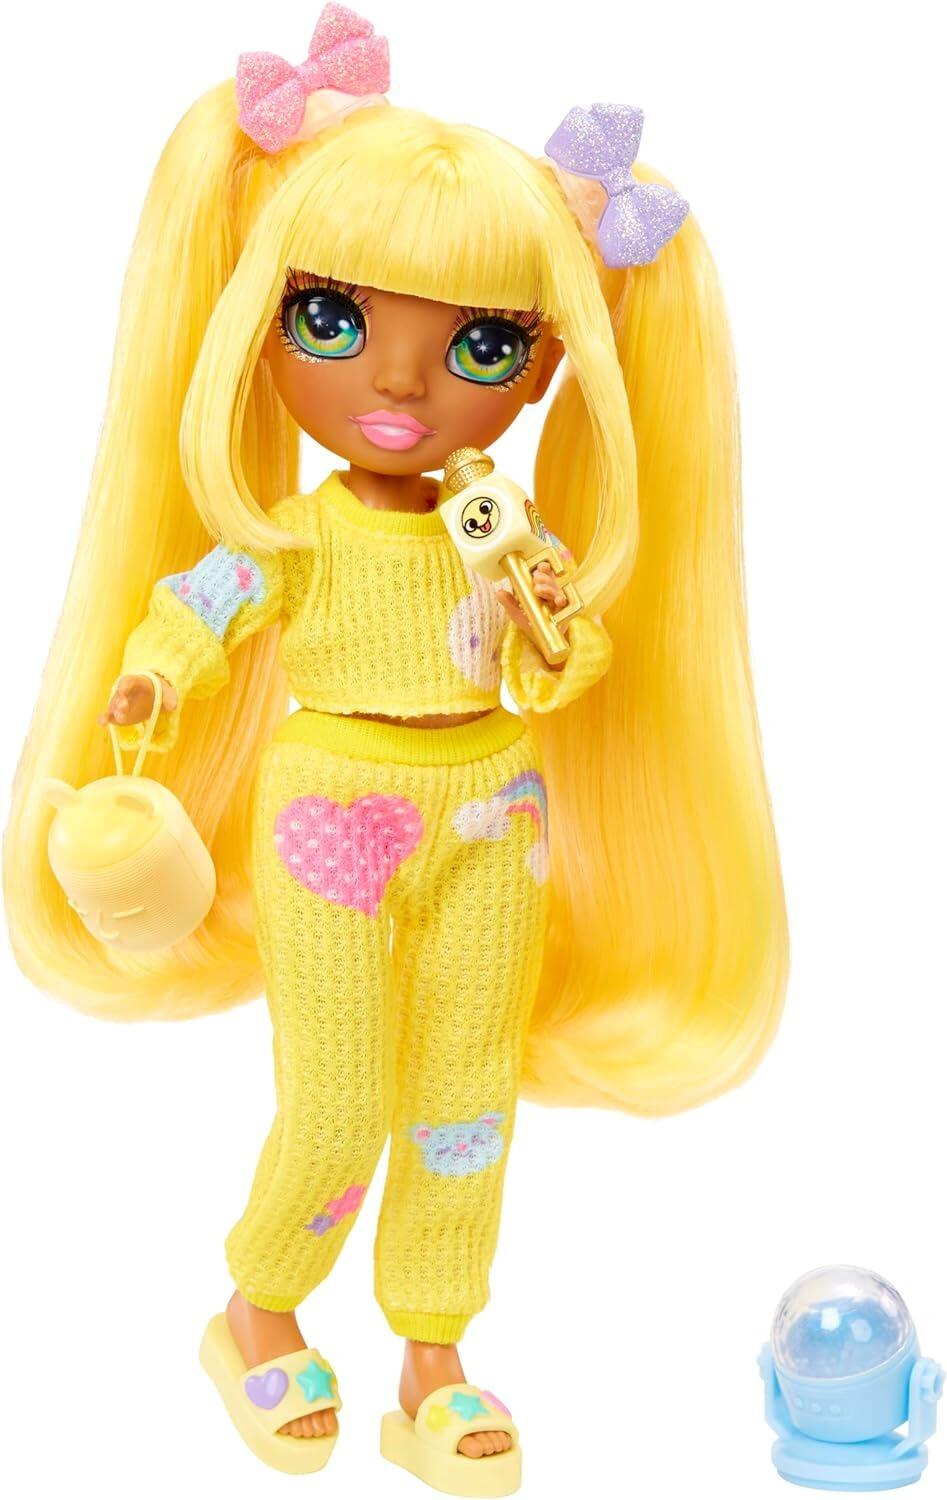 Rainbow High Jr High PJ Party-Sunny (Yellow) 9” Posable Doll with Soft Onesie, Slippers, Play Accessories